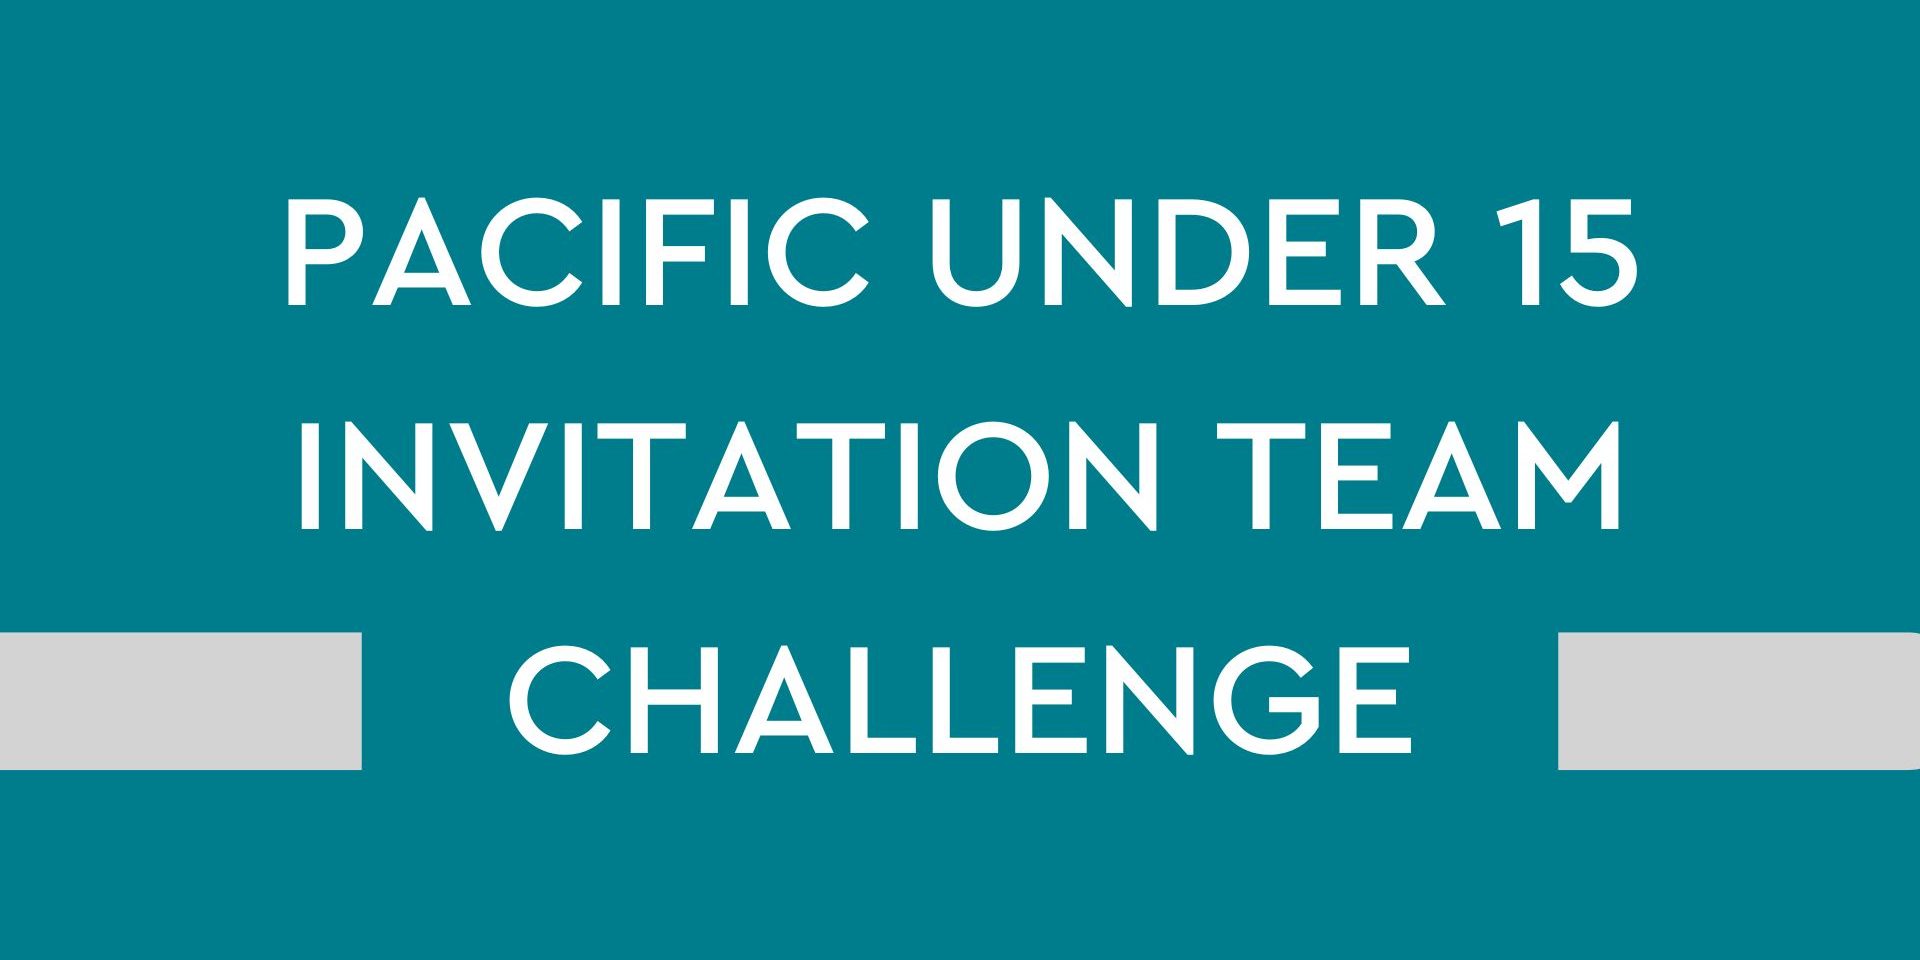 Inaugural Pacific Under 15 Invitation Team Challenge launching in February 2023